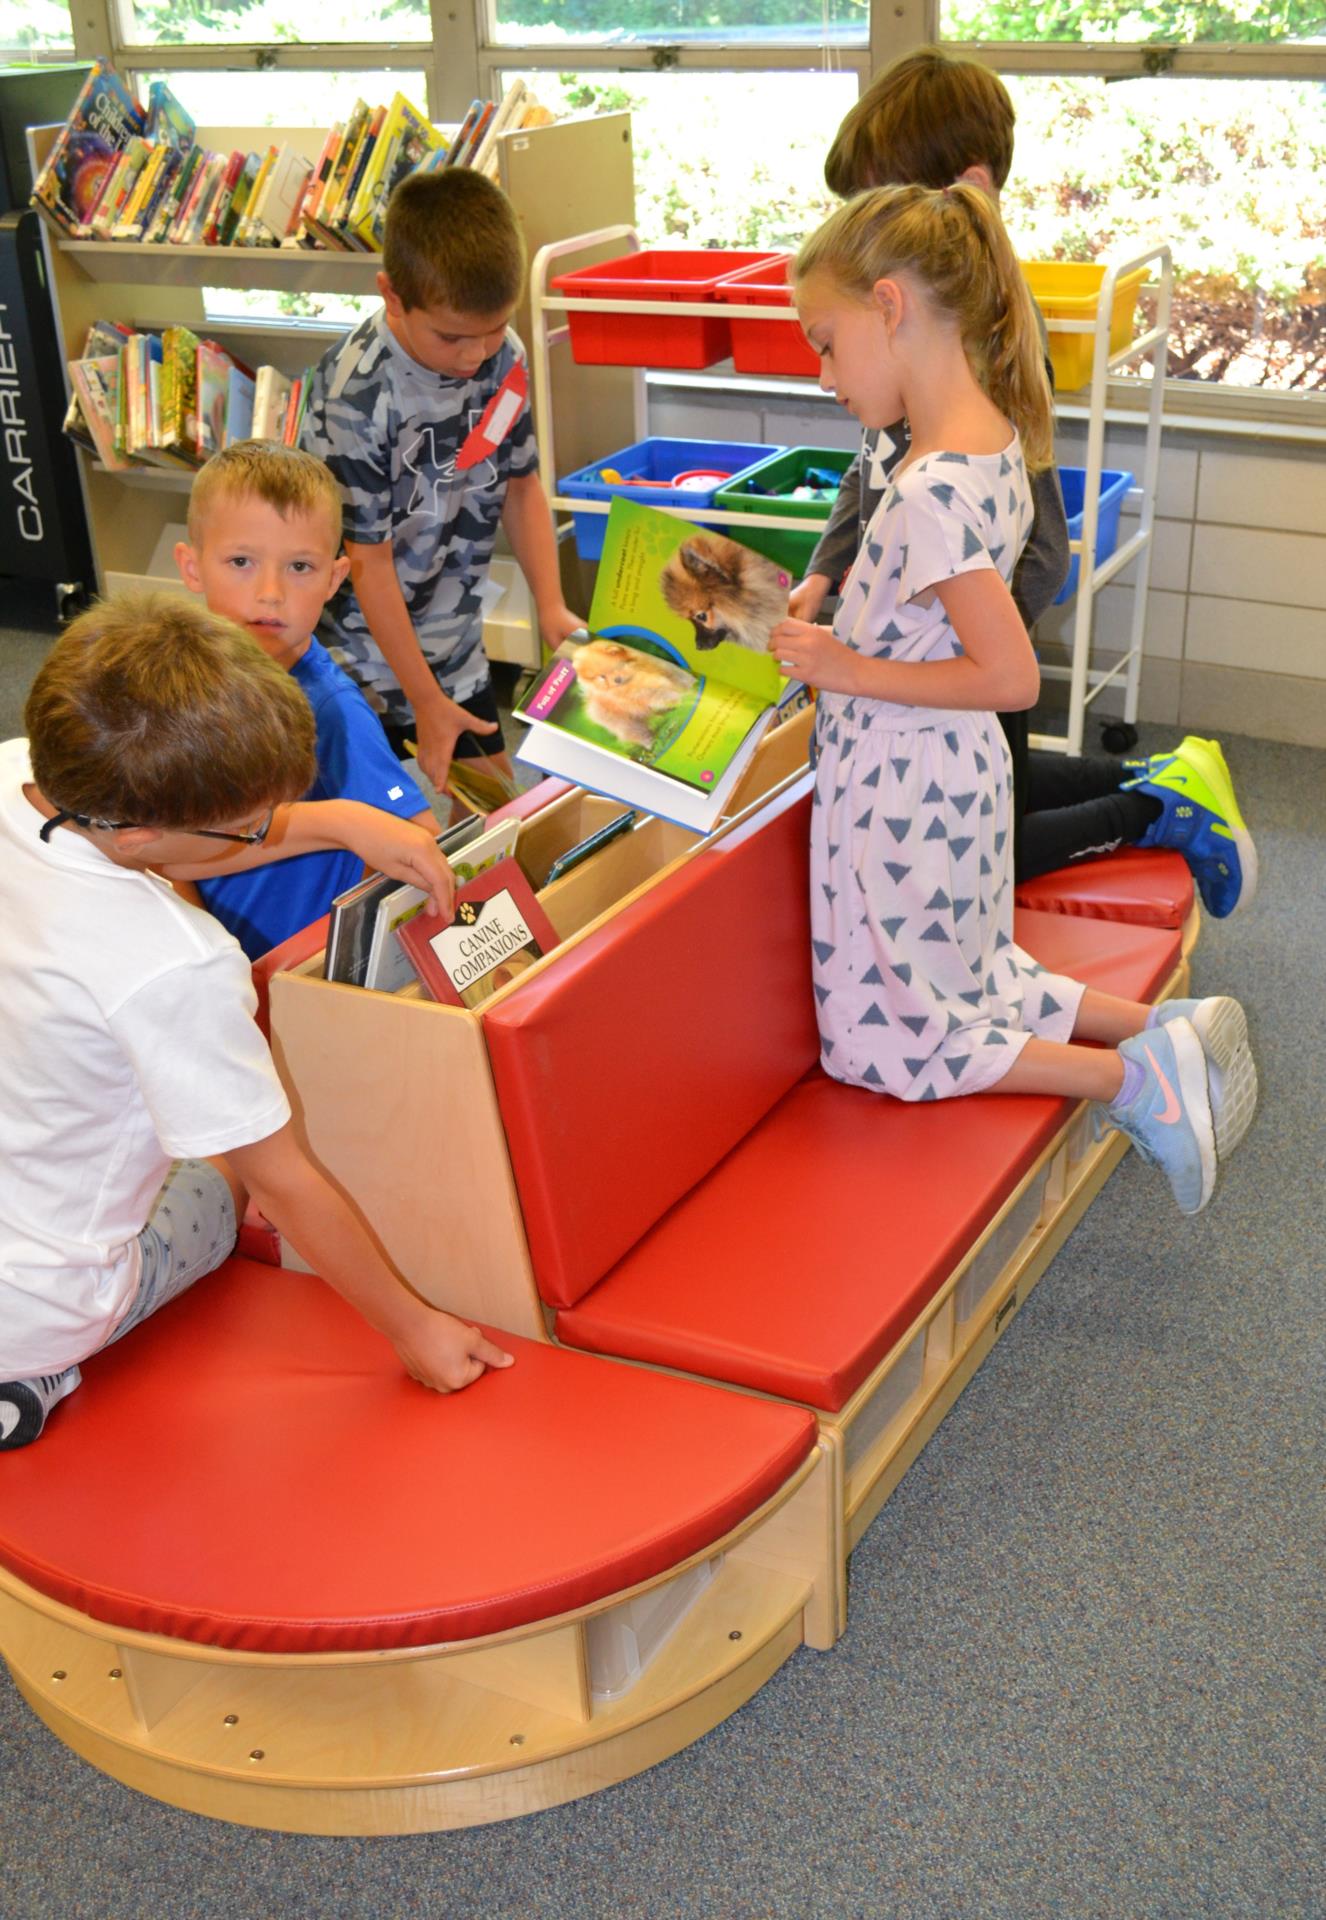 library bench in use